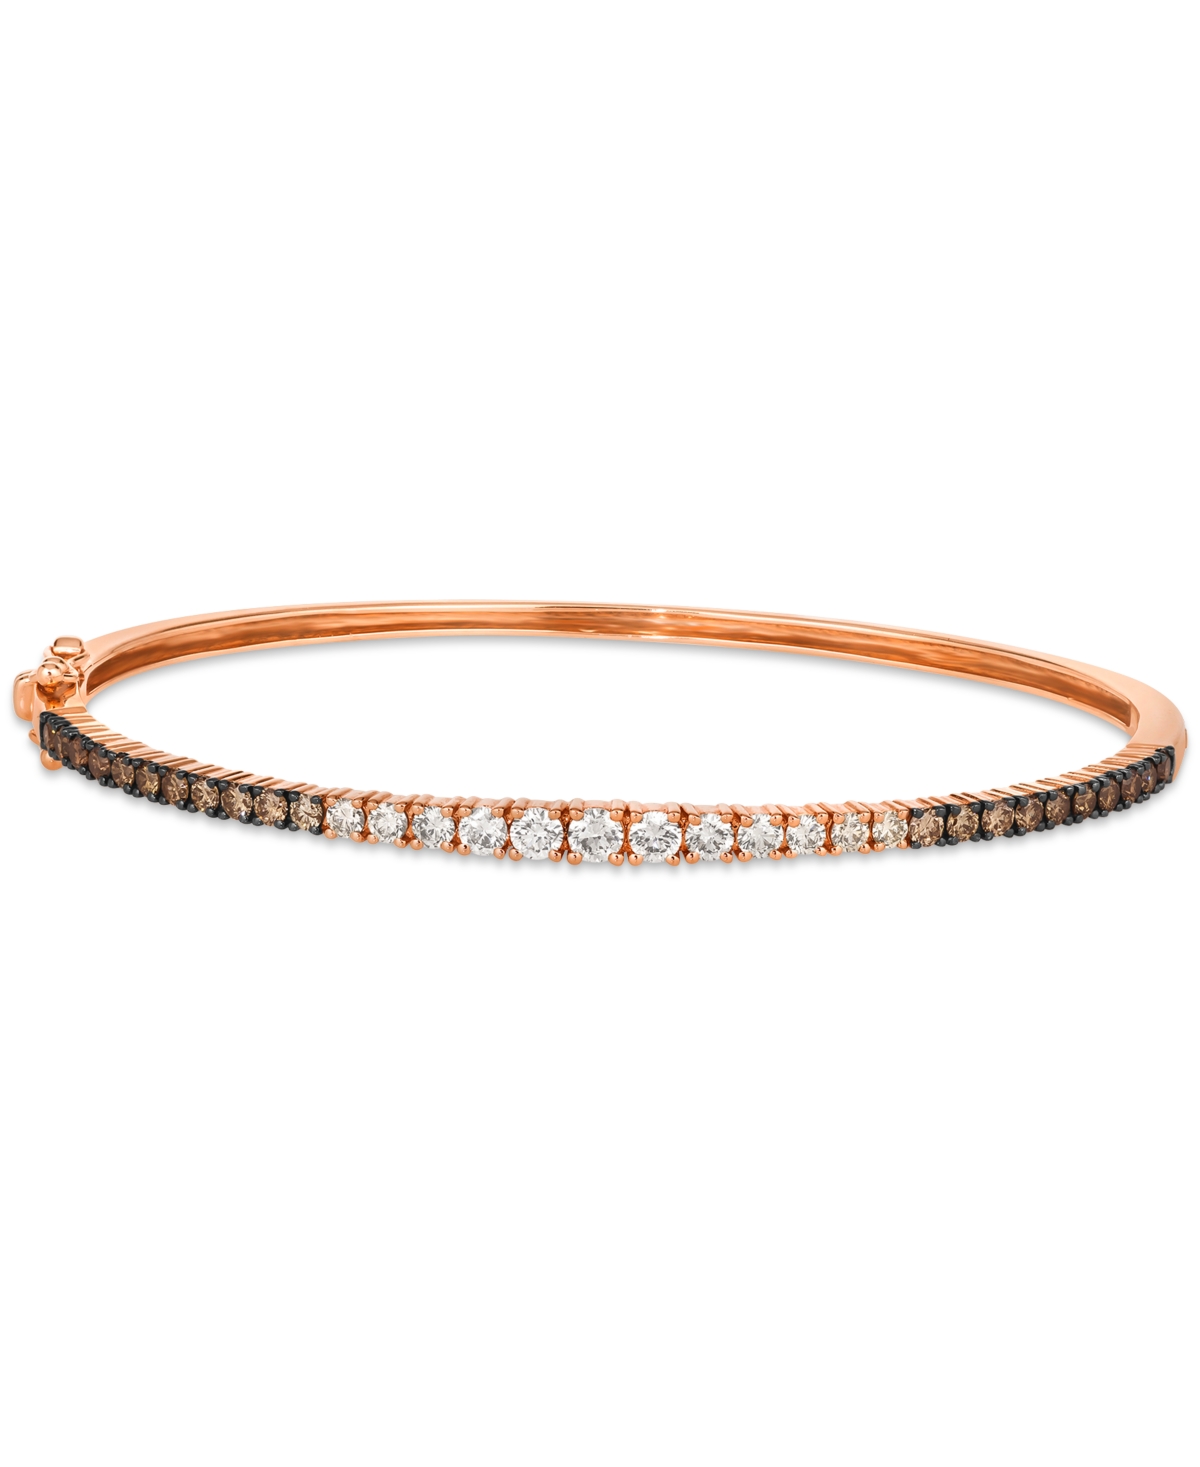 Ombre Chocolate Ombre Diamond Bangle Bracelet (1-1/3 ct. t.w.) in 14k Gold (Also Available in Rose Gold and White Gold) - Rose Gold